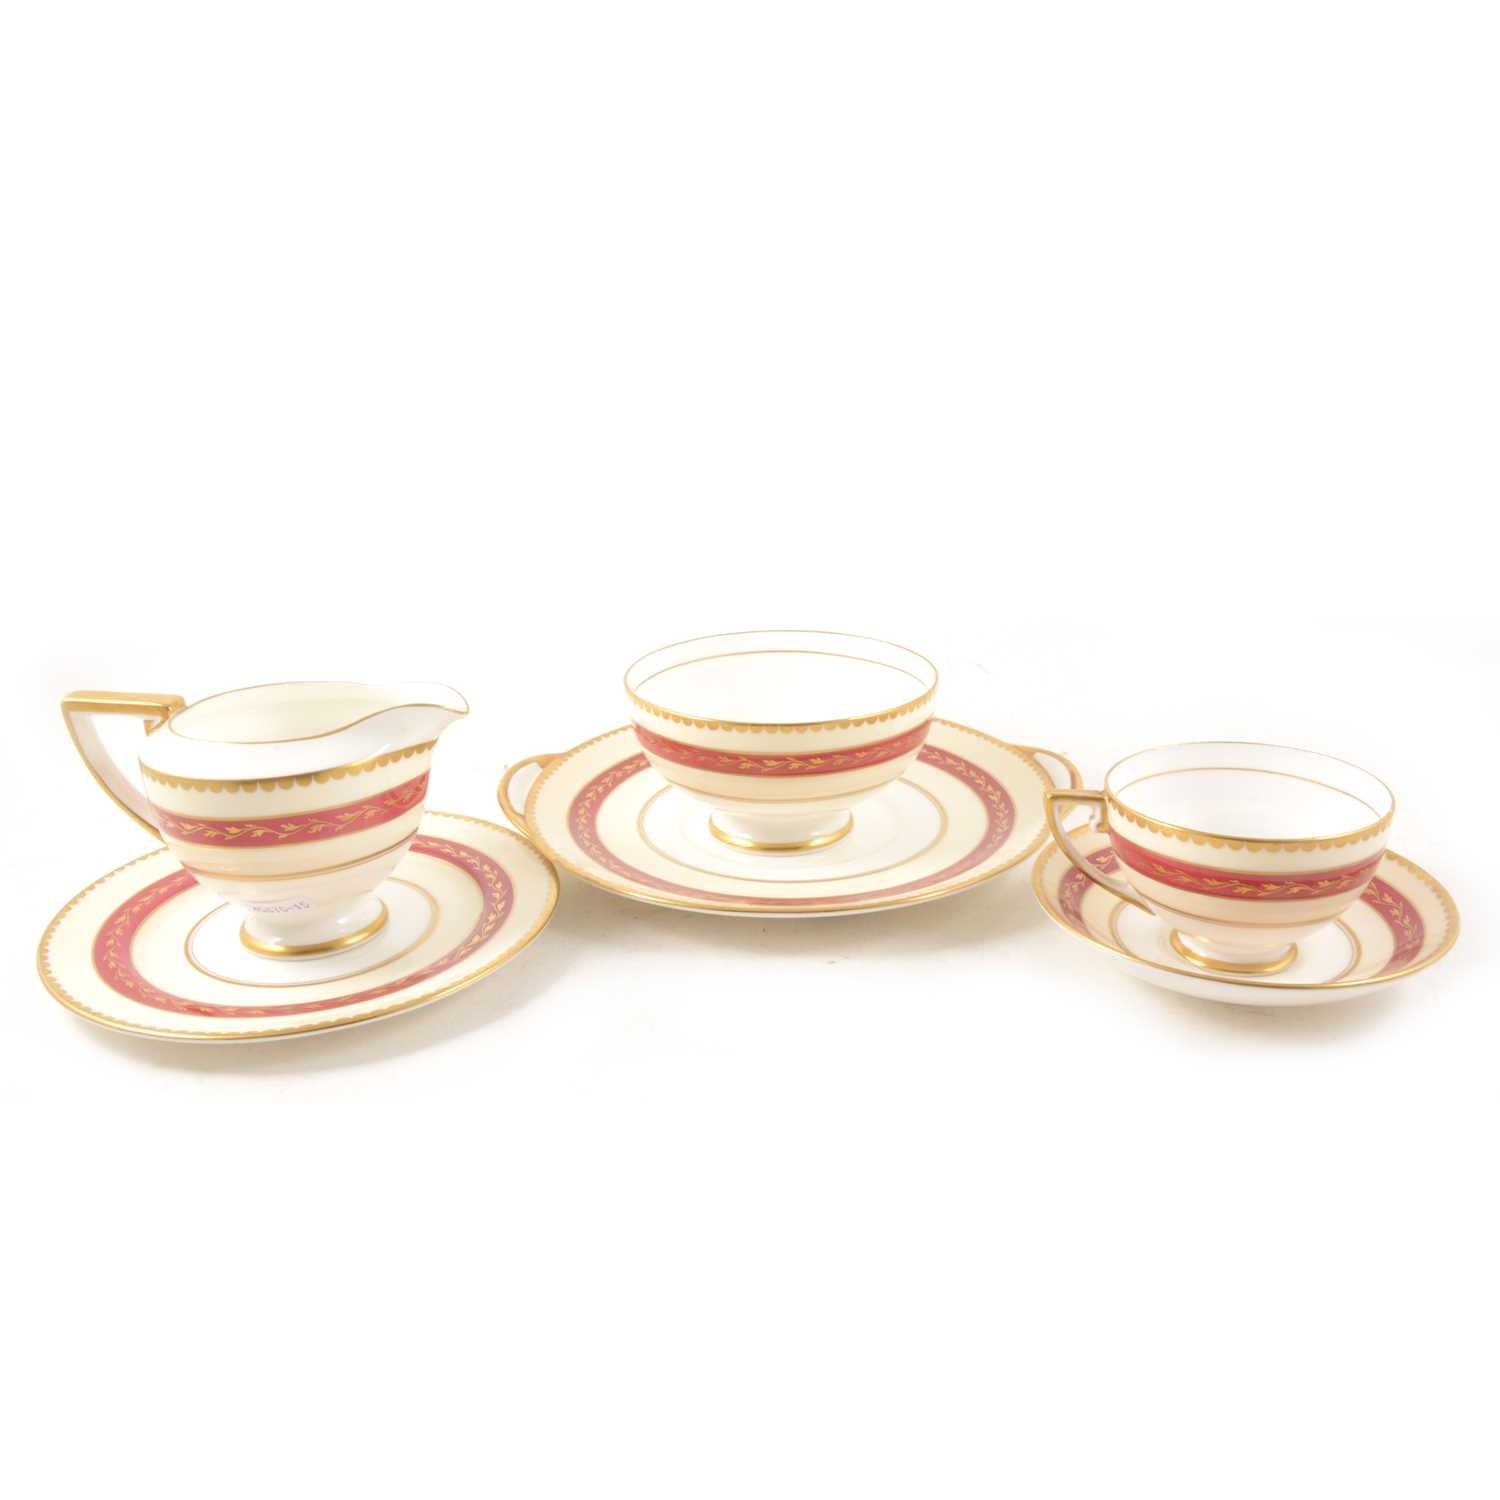 Lot 20 - Royal Doulton bone china teaset, cream and red banded, with gilt.